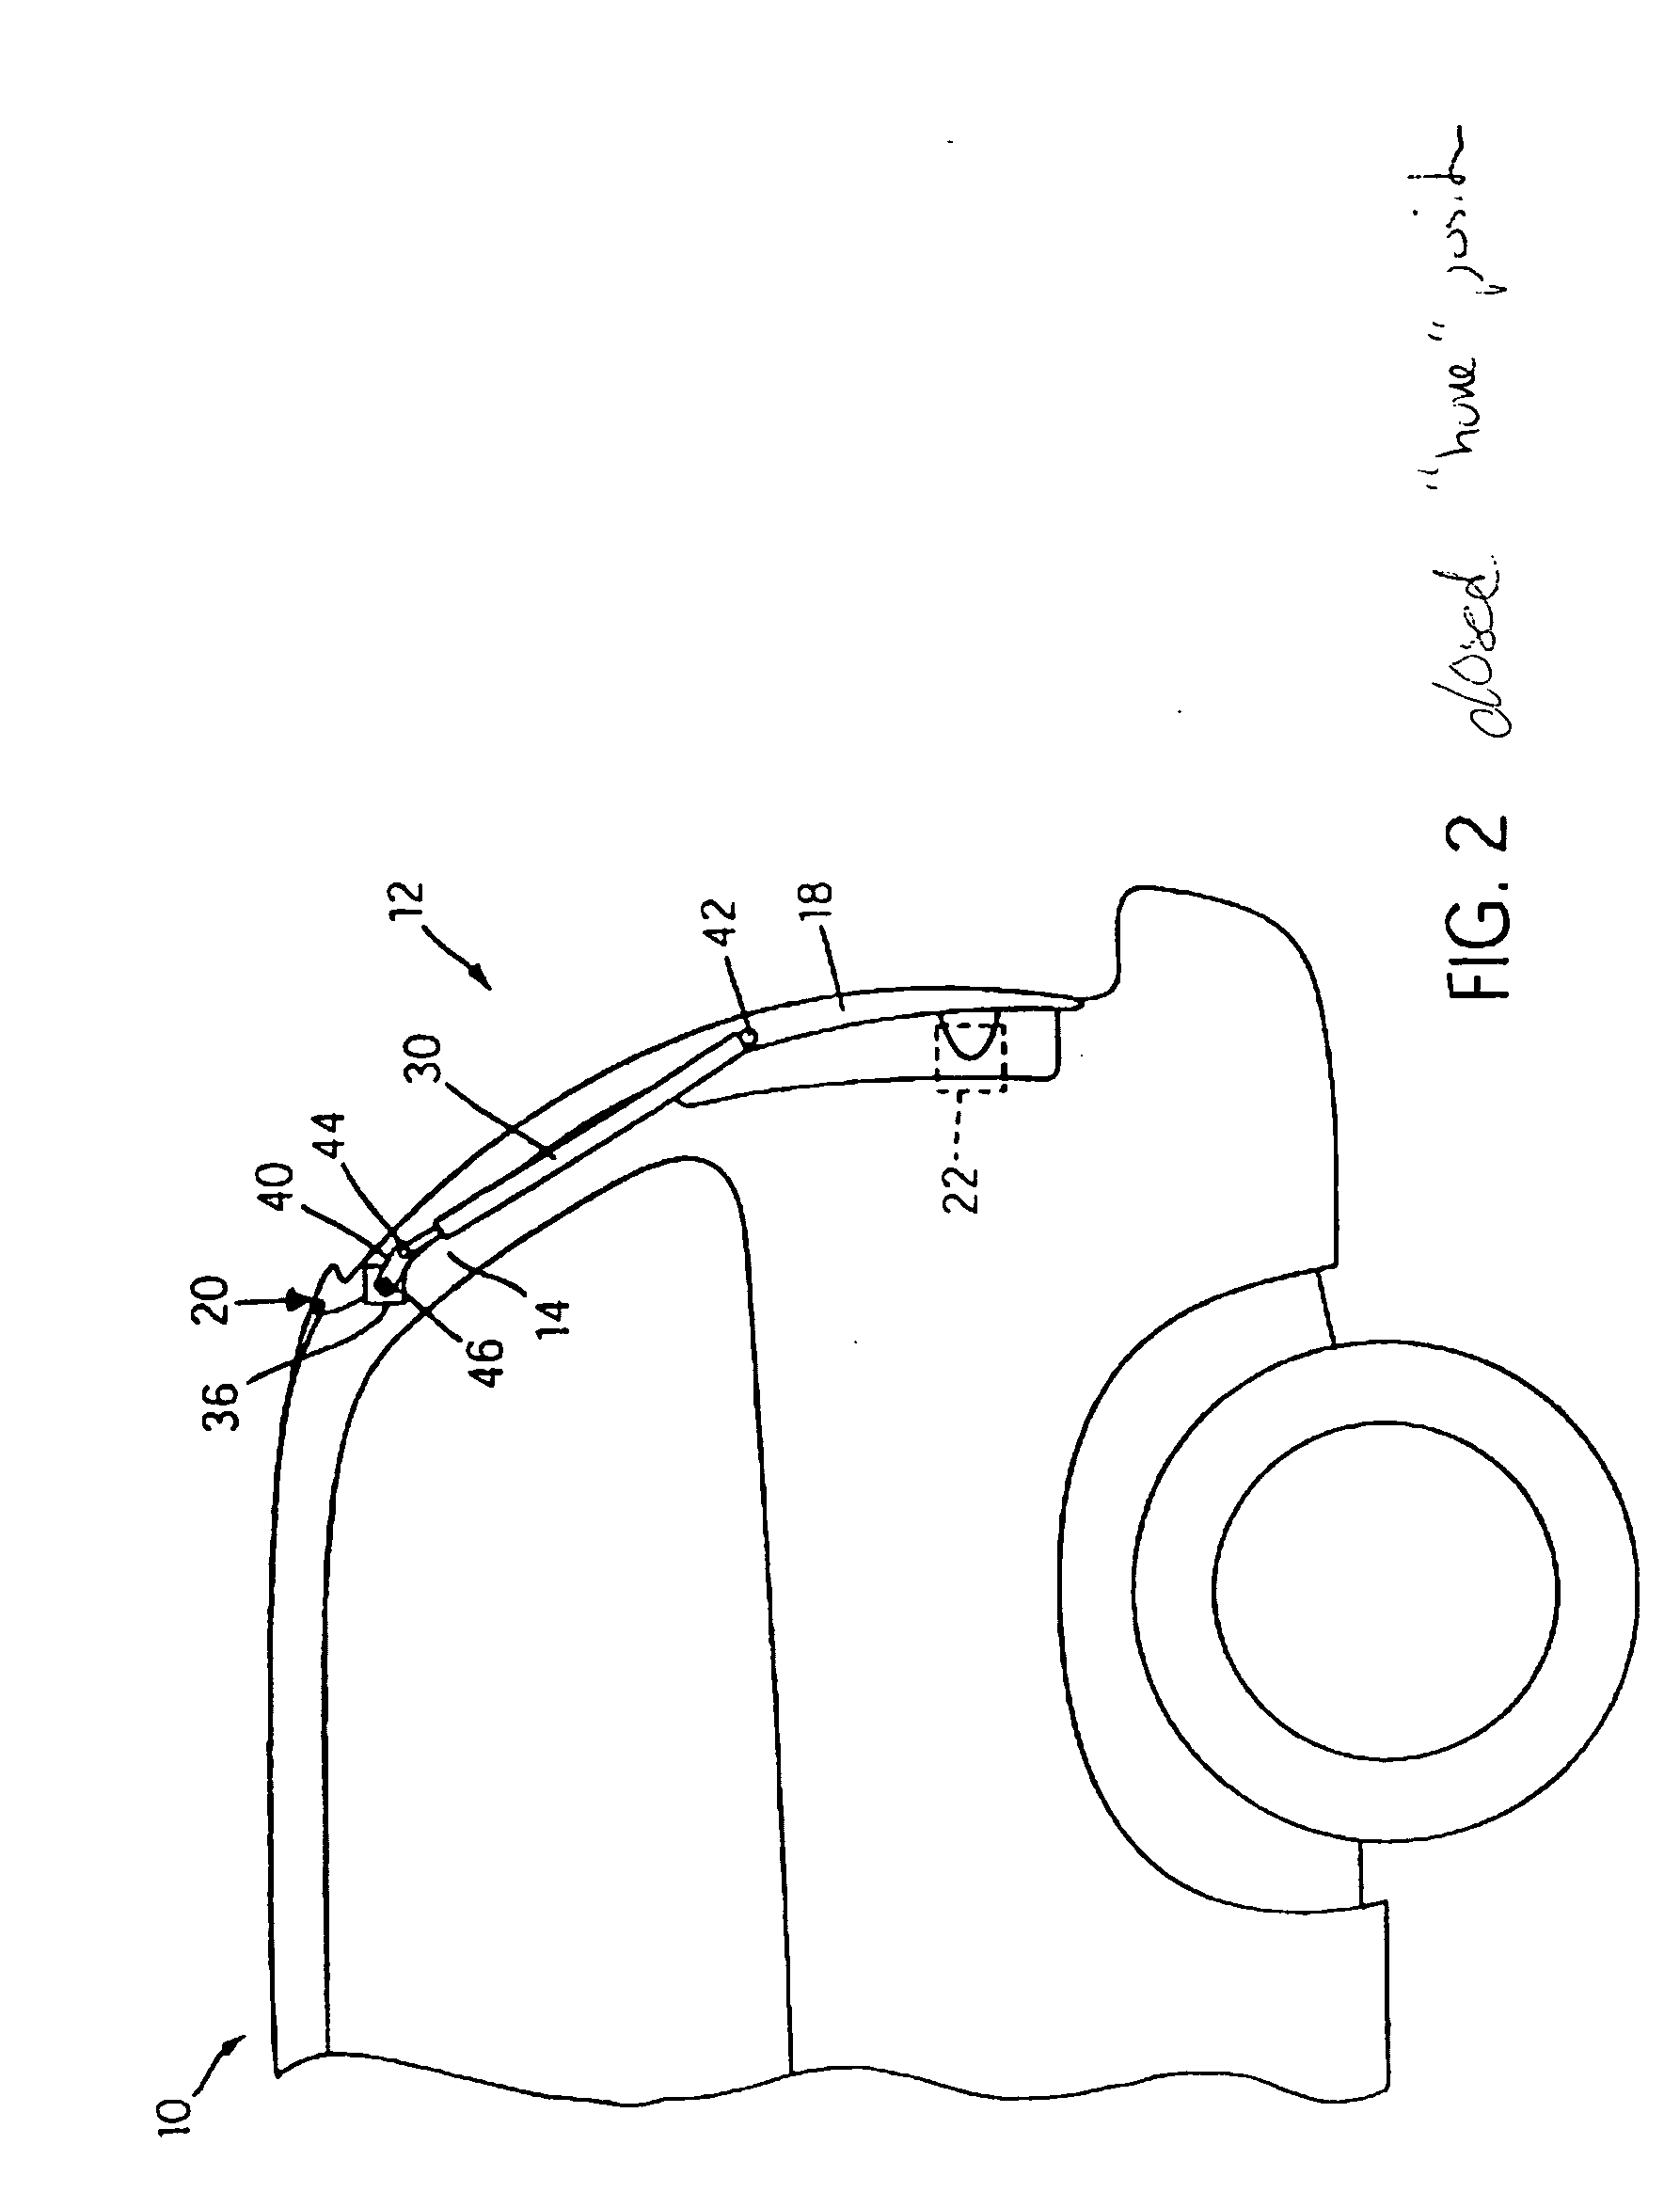 Low-mounted powered opening system and control mechanism